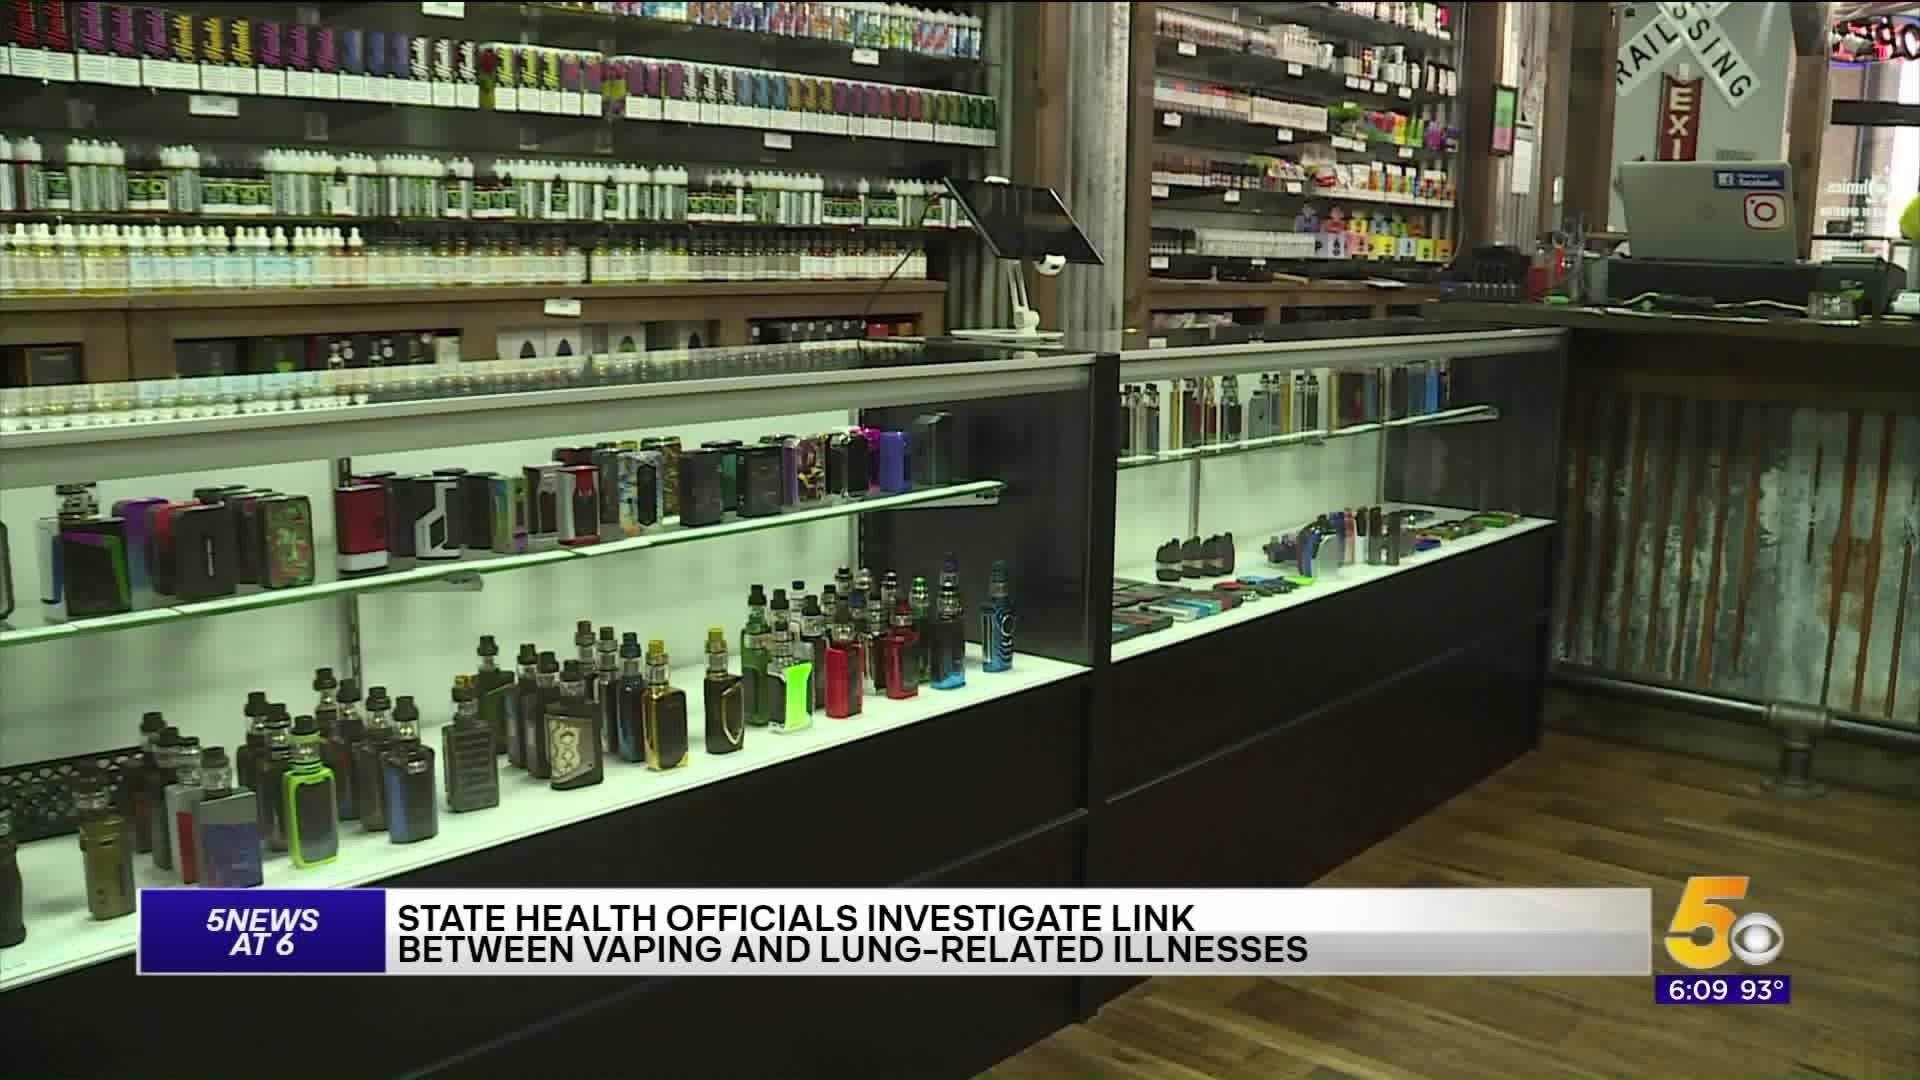 State Officials Investigate Link Between Vaping and Lung Illness